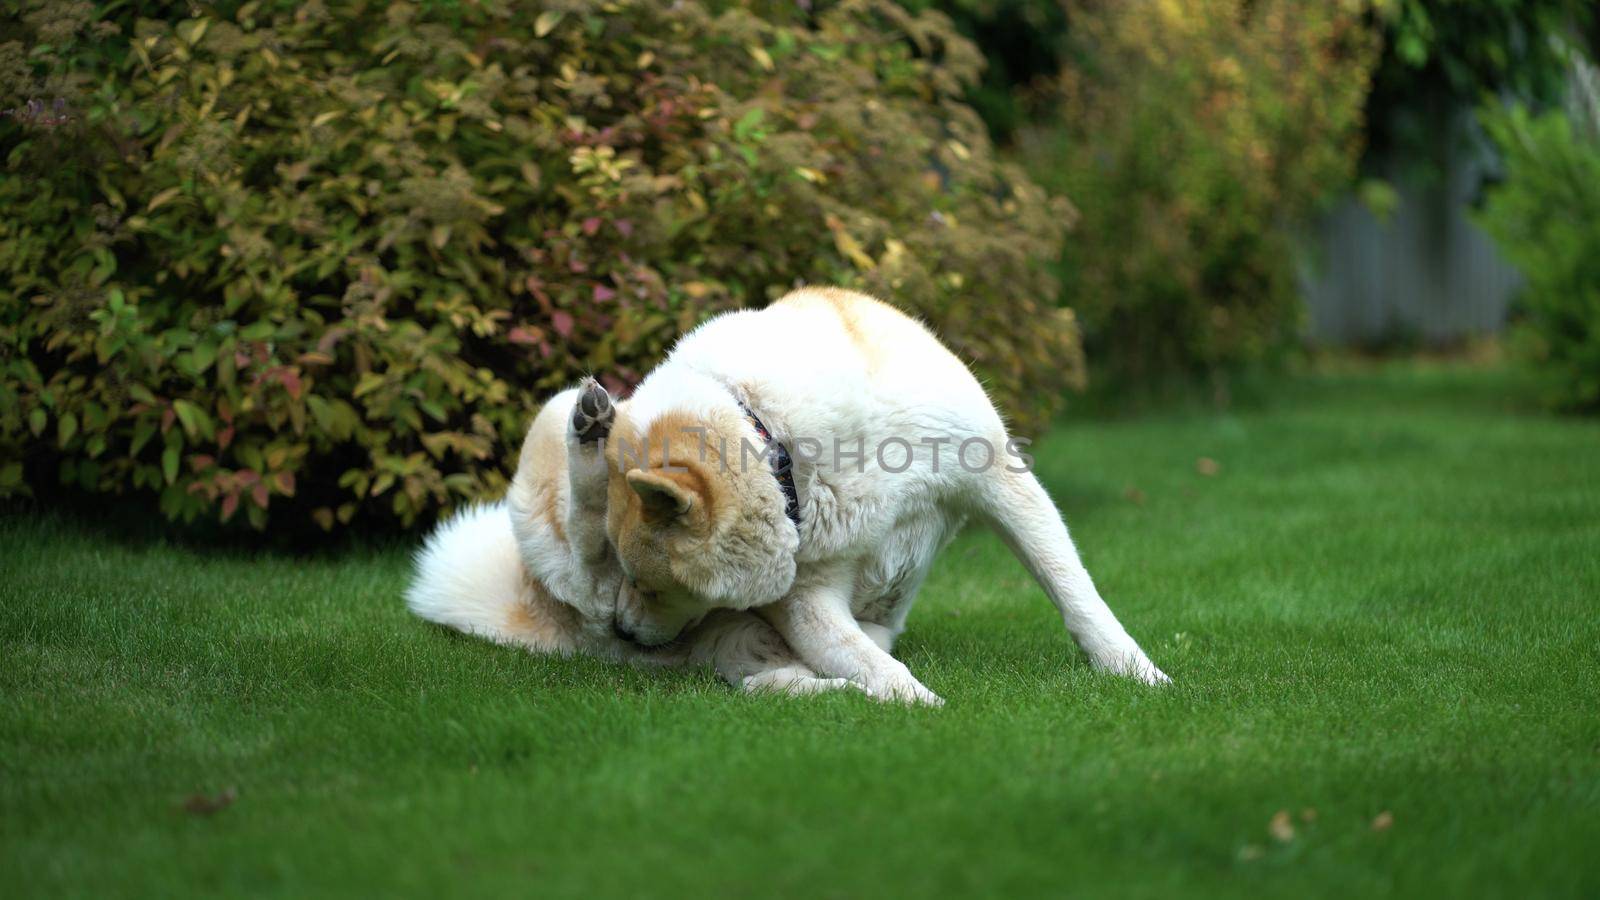 Akita inu resting on the lawn in the yard by Petrokill